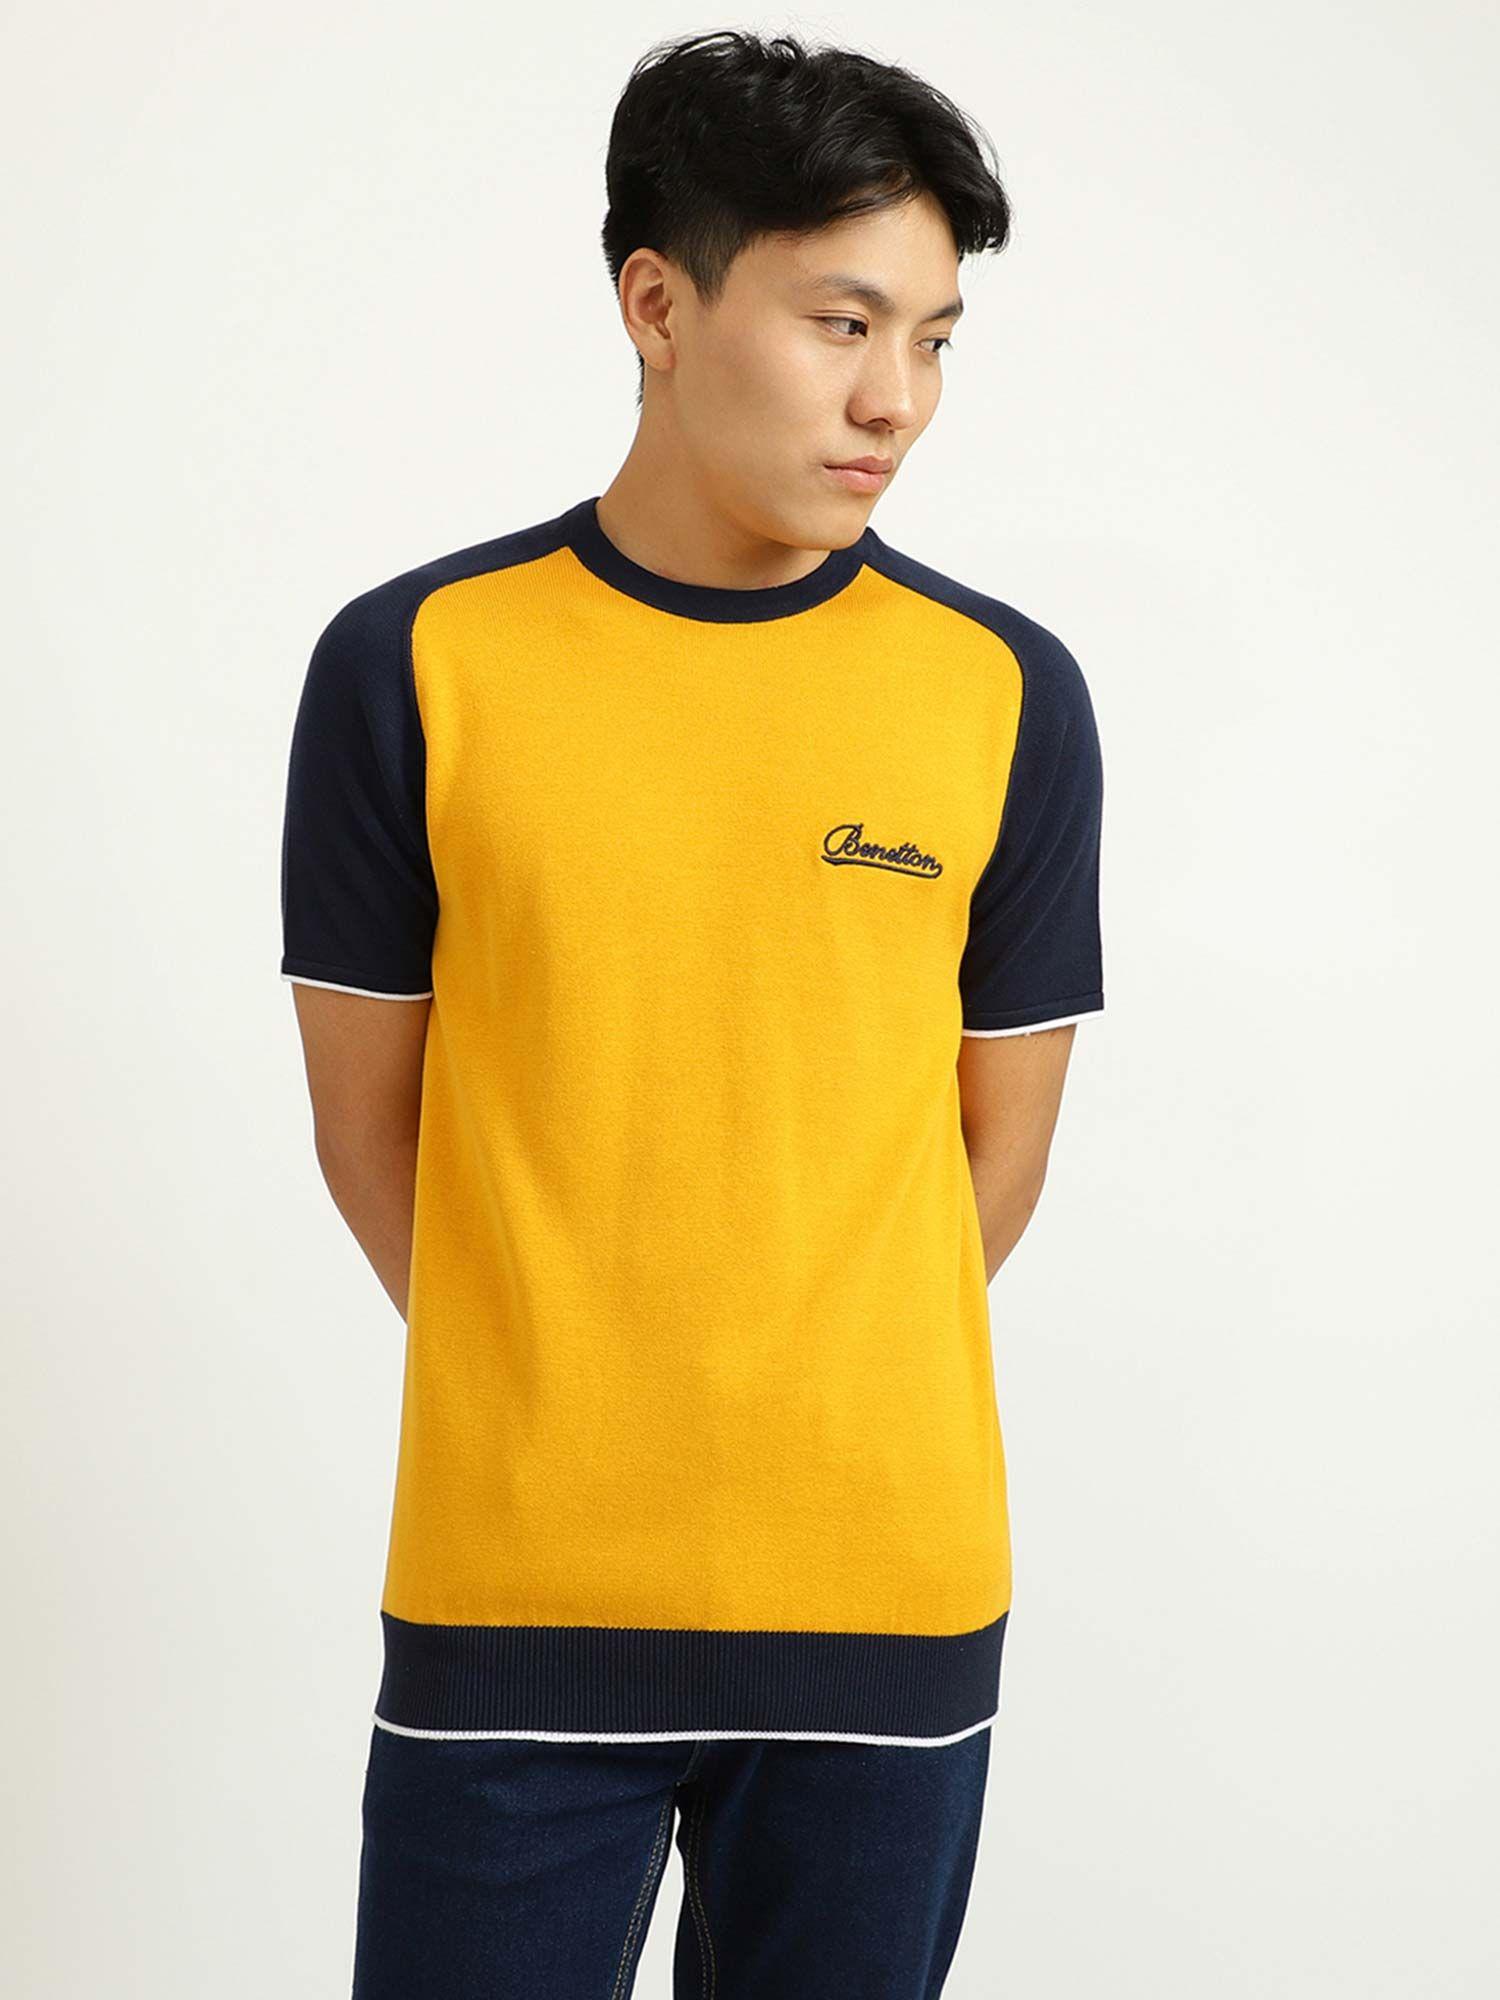 yellow and navy blue t-shirt